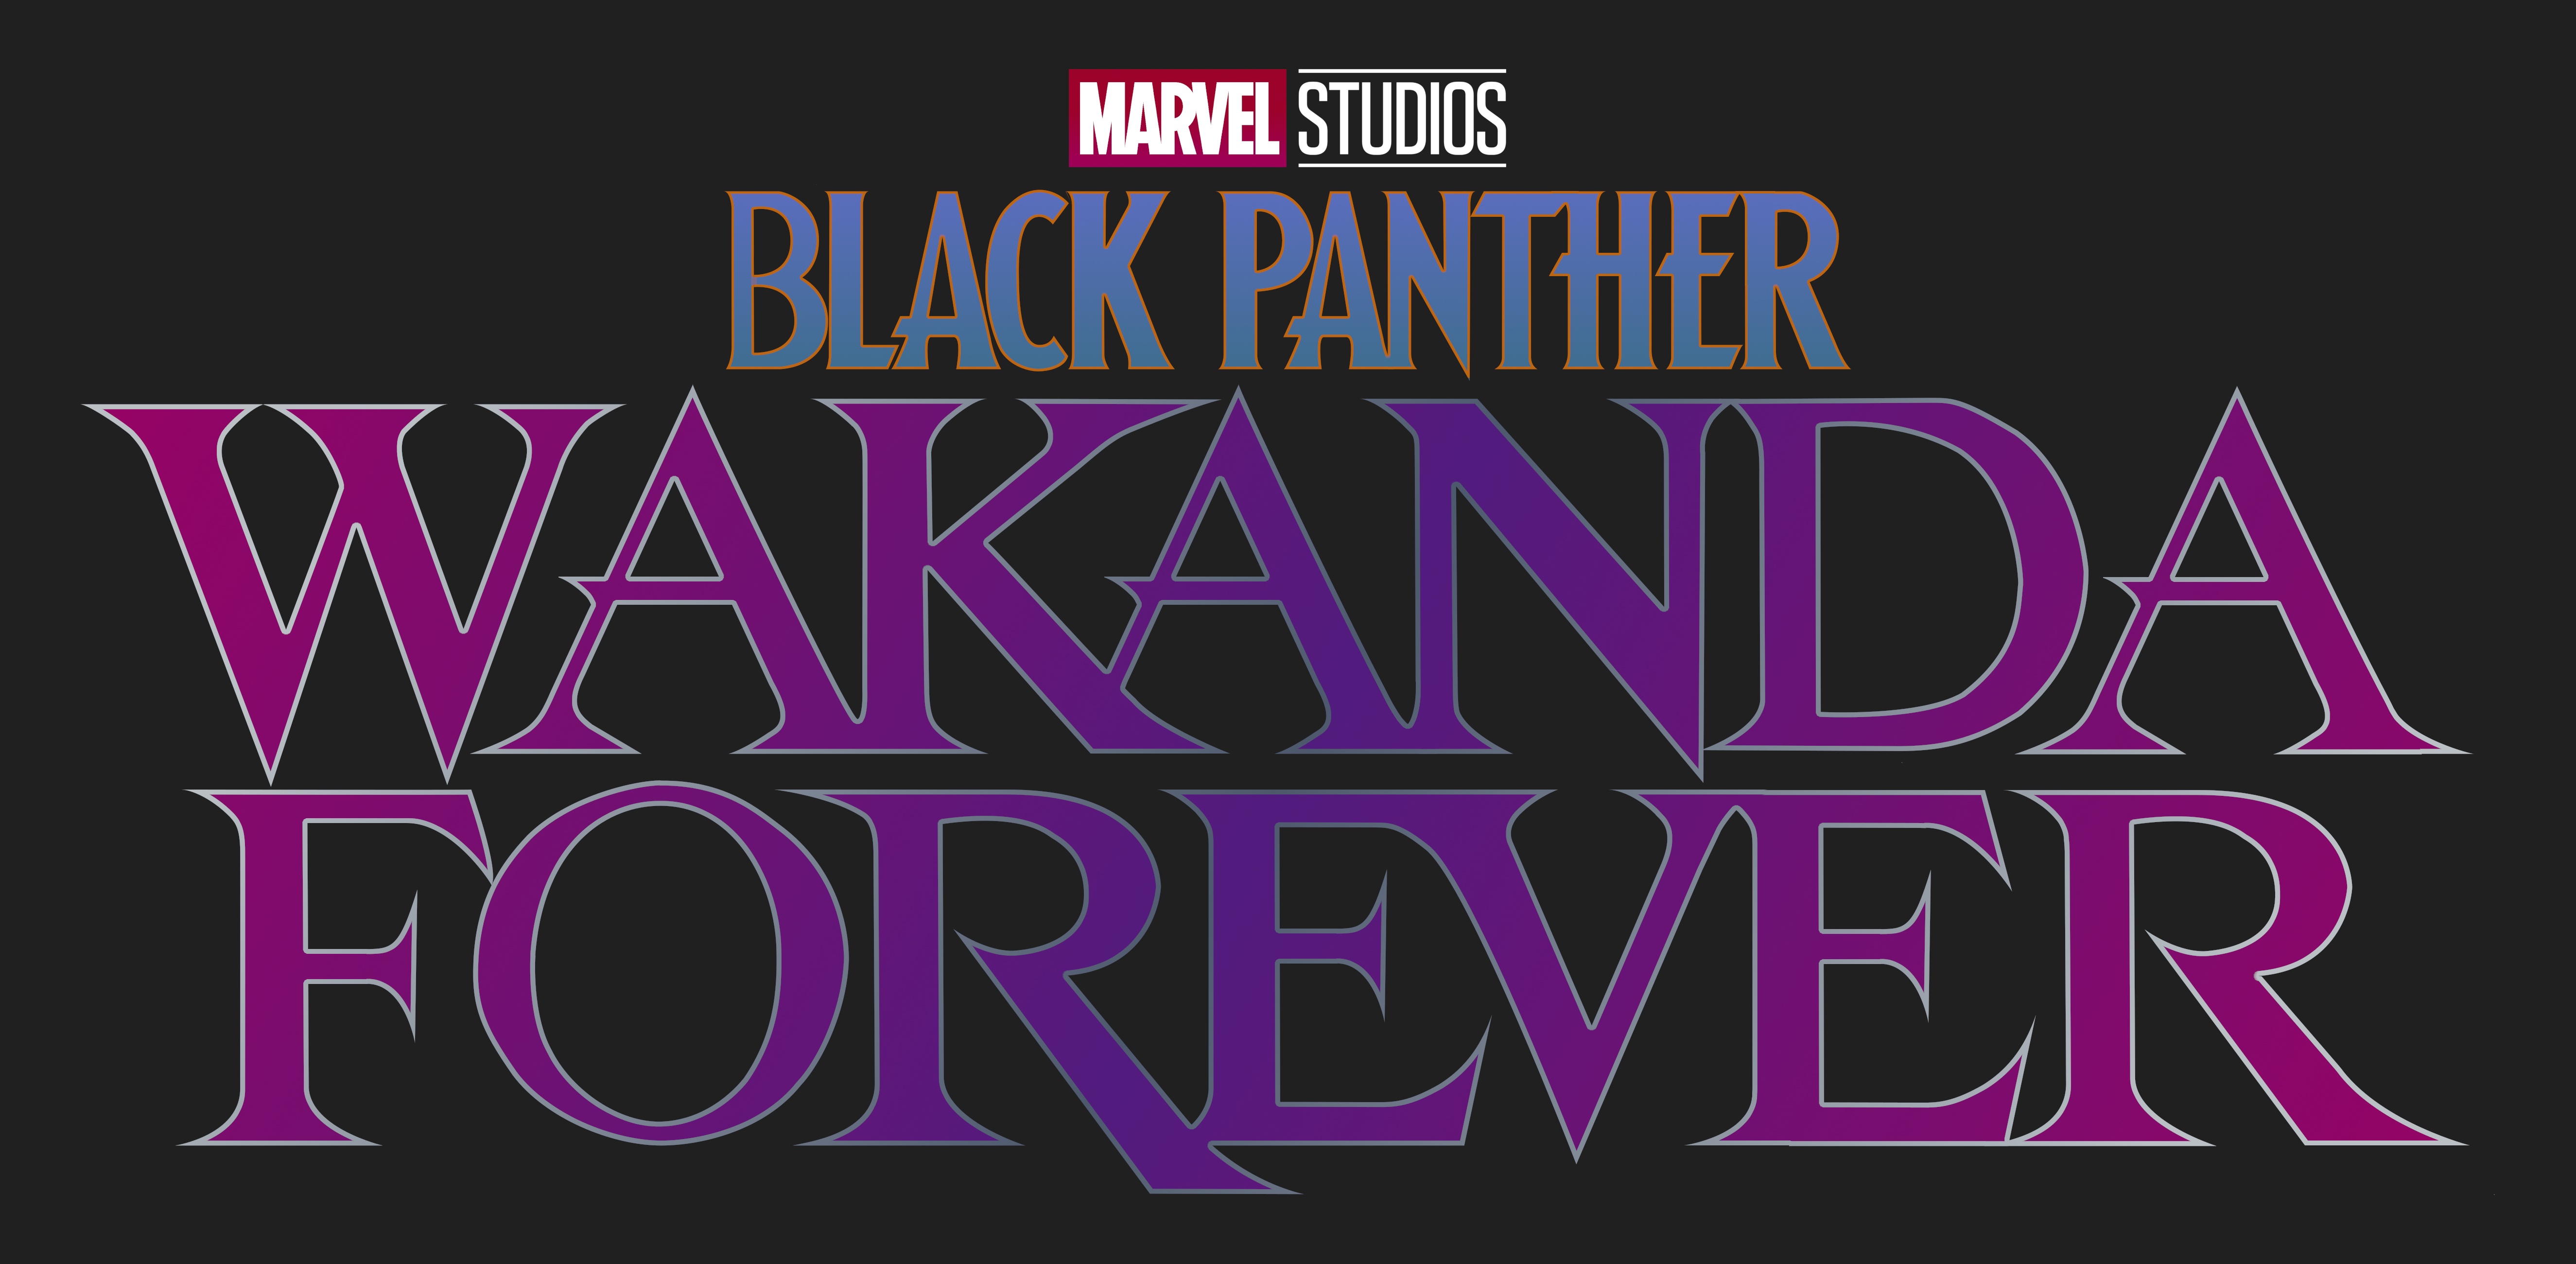 30+ Black Panther: Wakanda Forever HD Wallpapers and Backgrounds